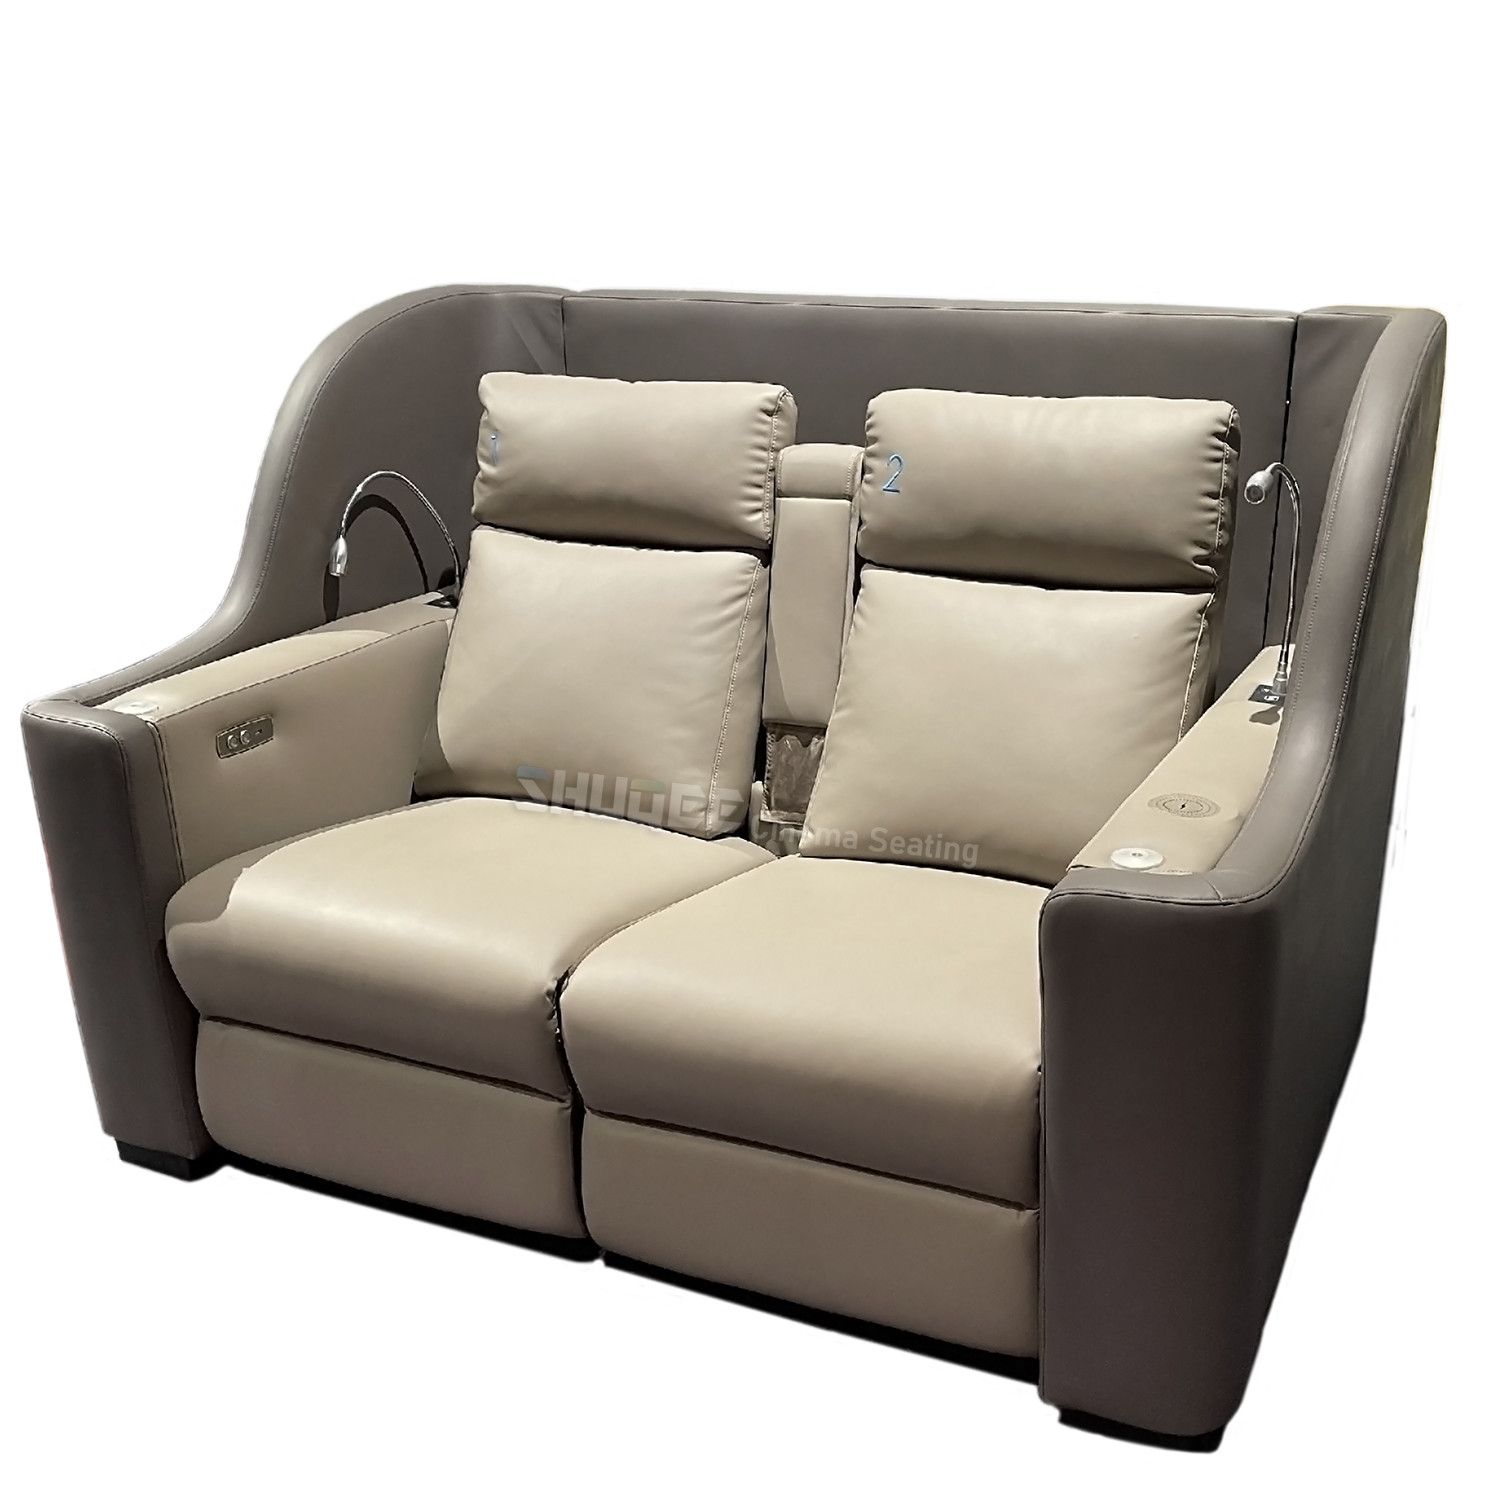 Modern Movie Theater Seats With Private Space And Electric Recliner Foot Pedal